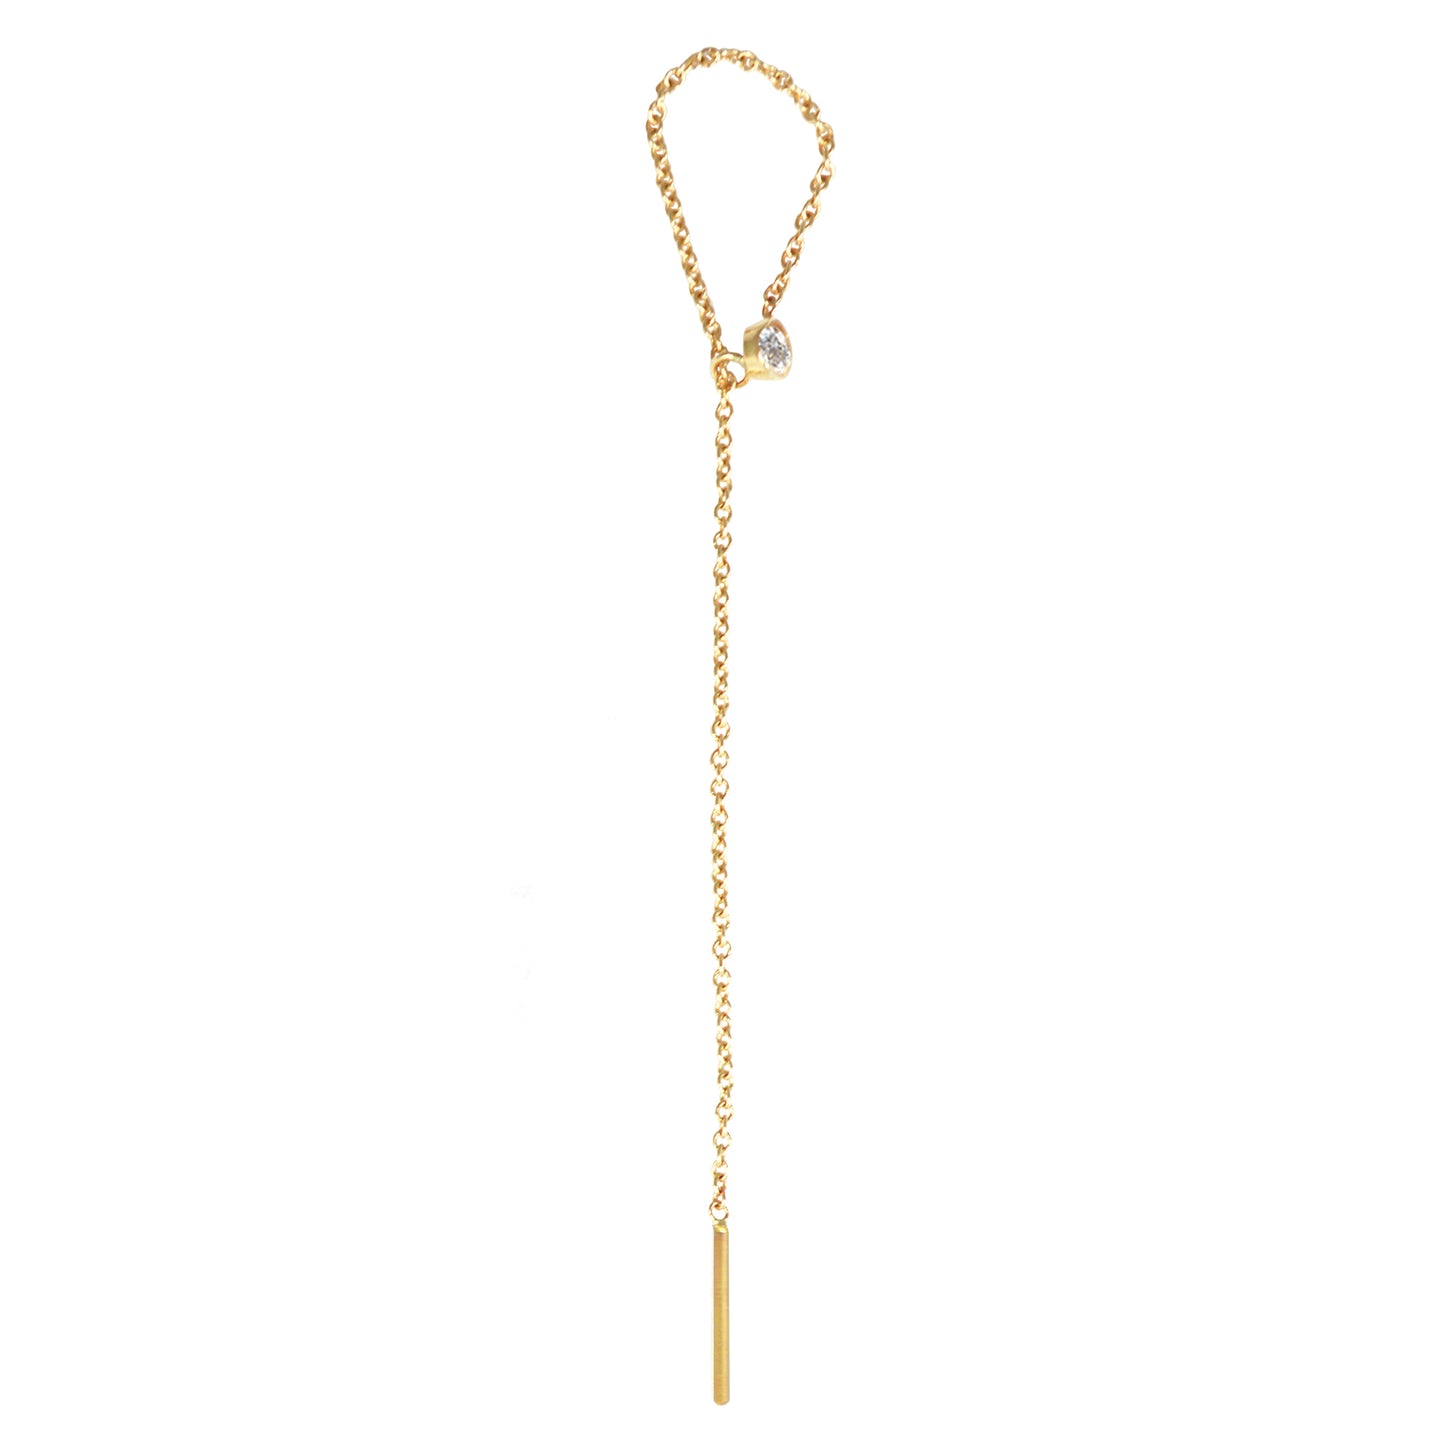 Lucia Diamond Lariat Earring Side View